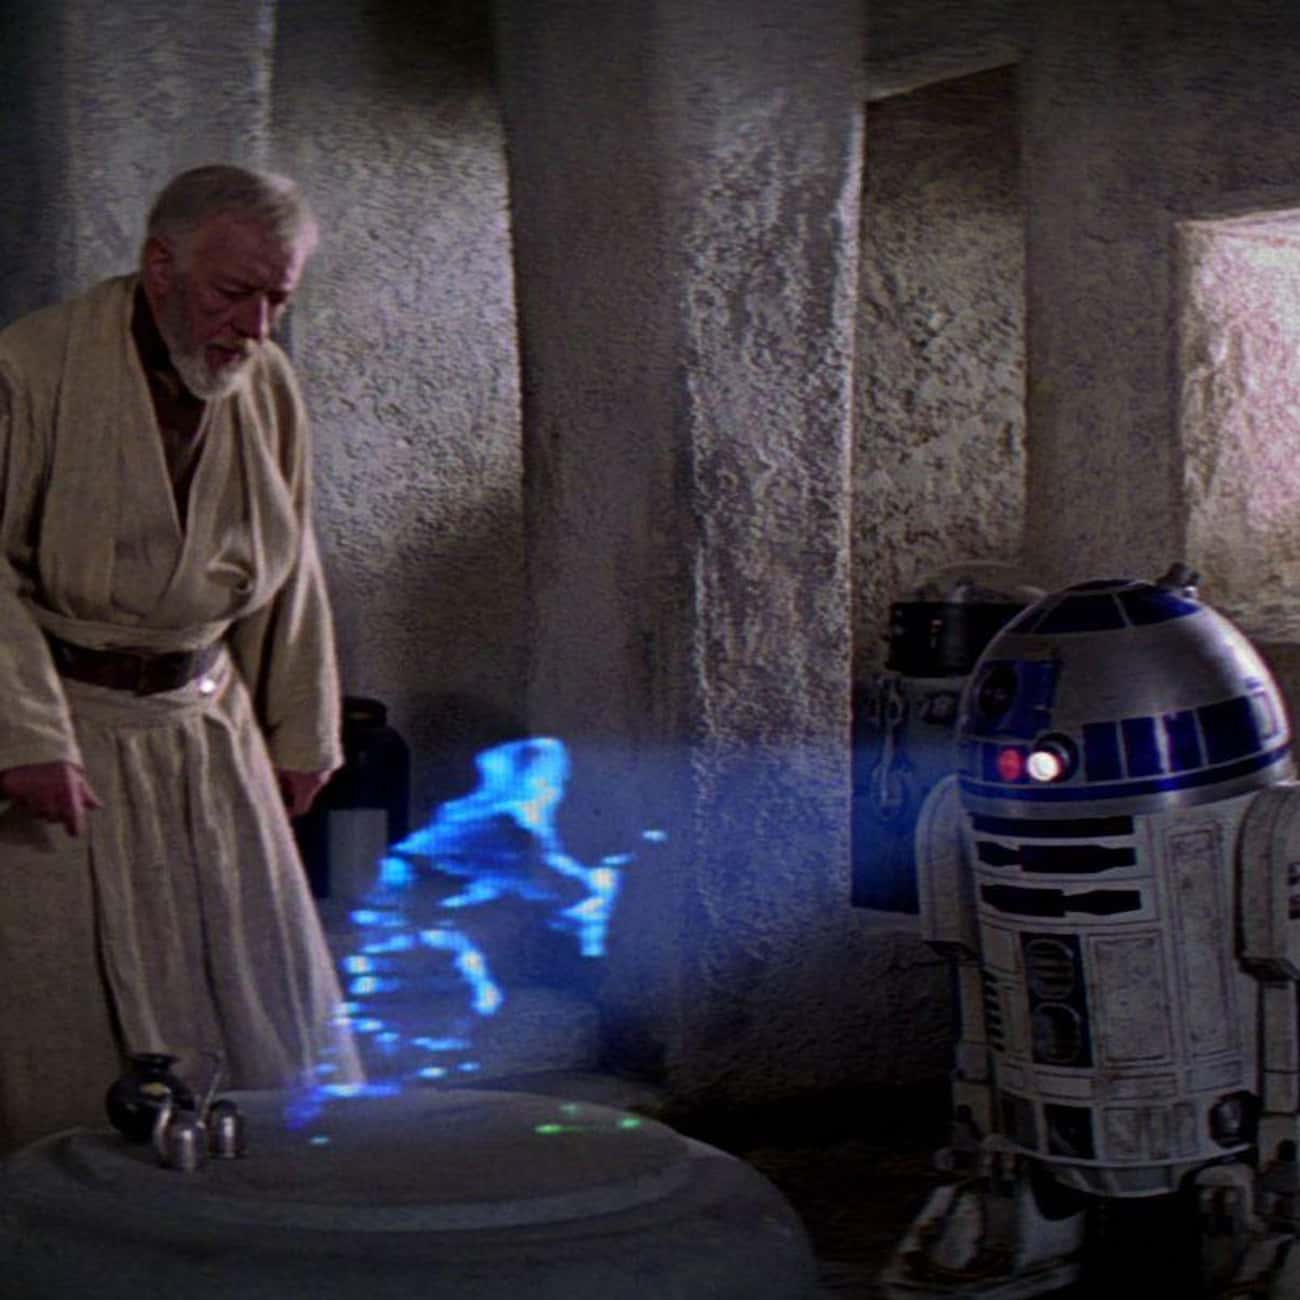 Obi-Wan Totally Recognized R2-D2 And C-3PO